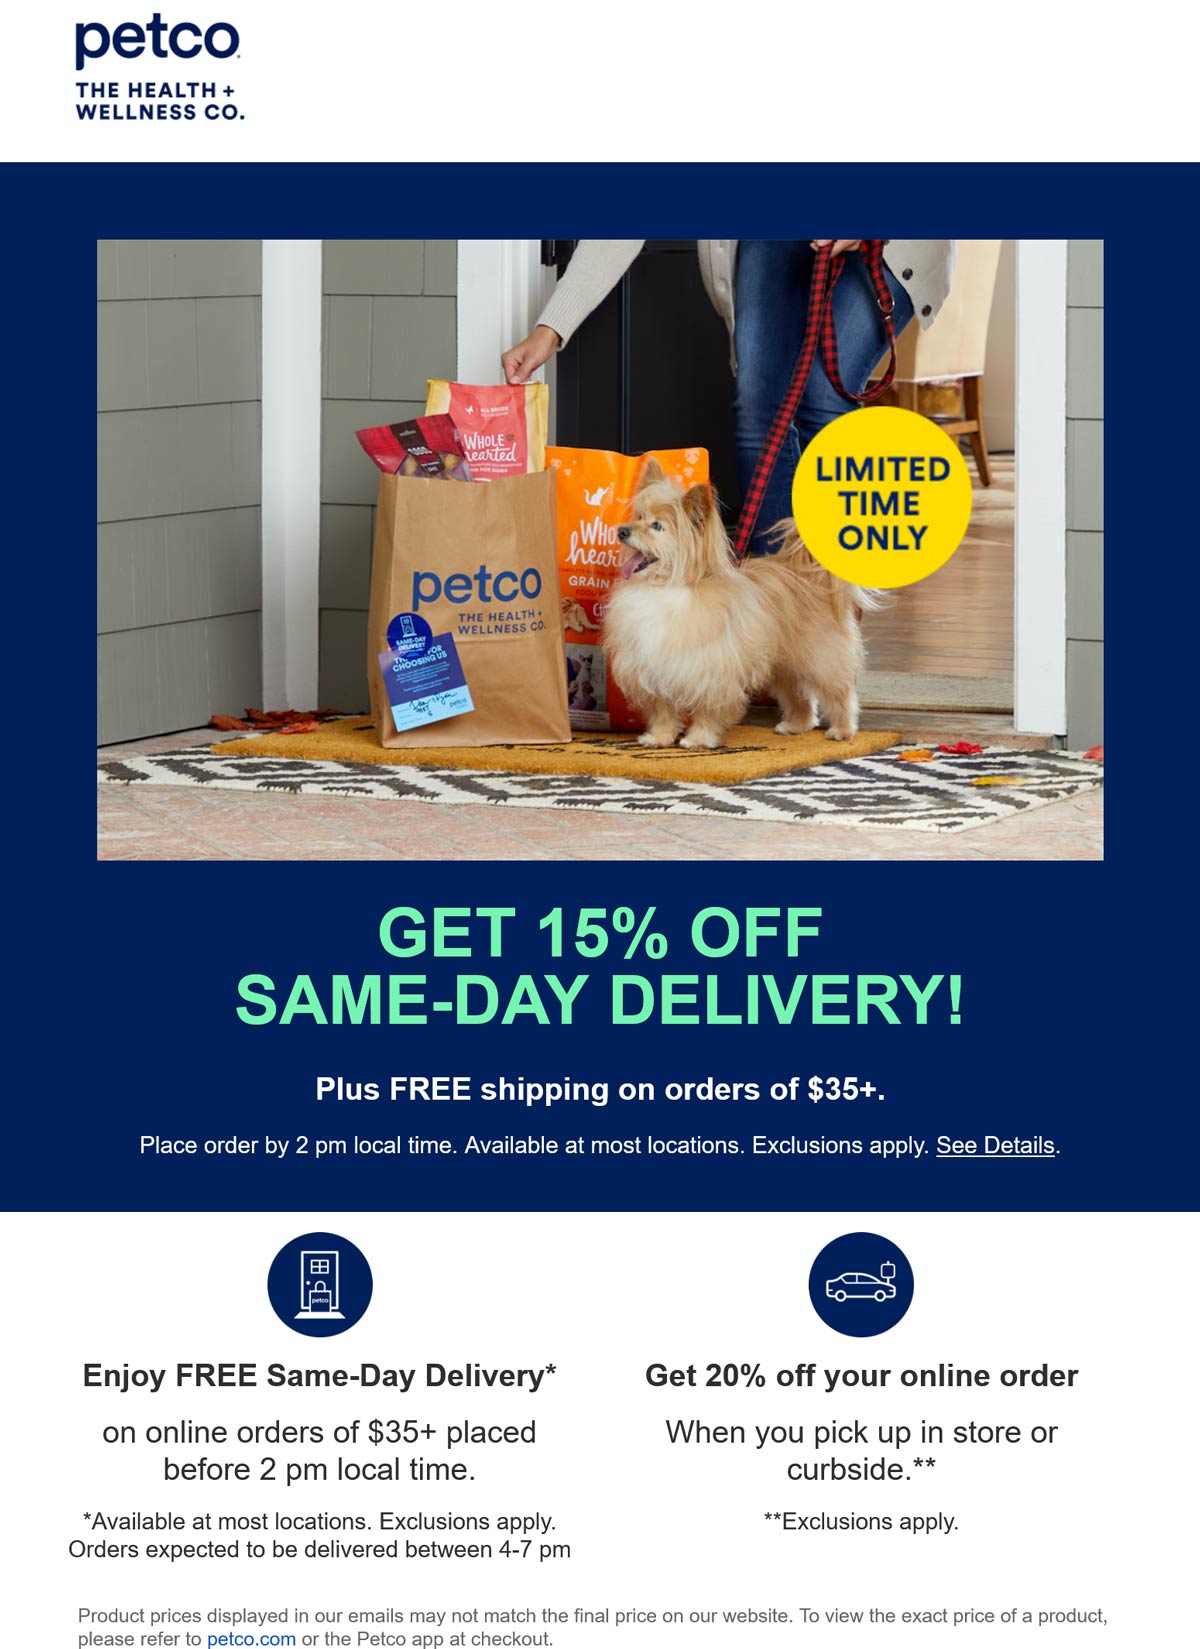 Petco coupons & promo code for [December 2022]